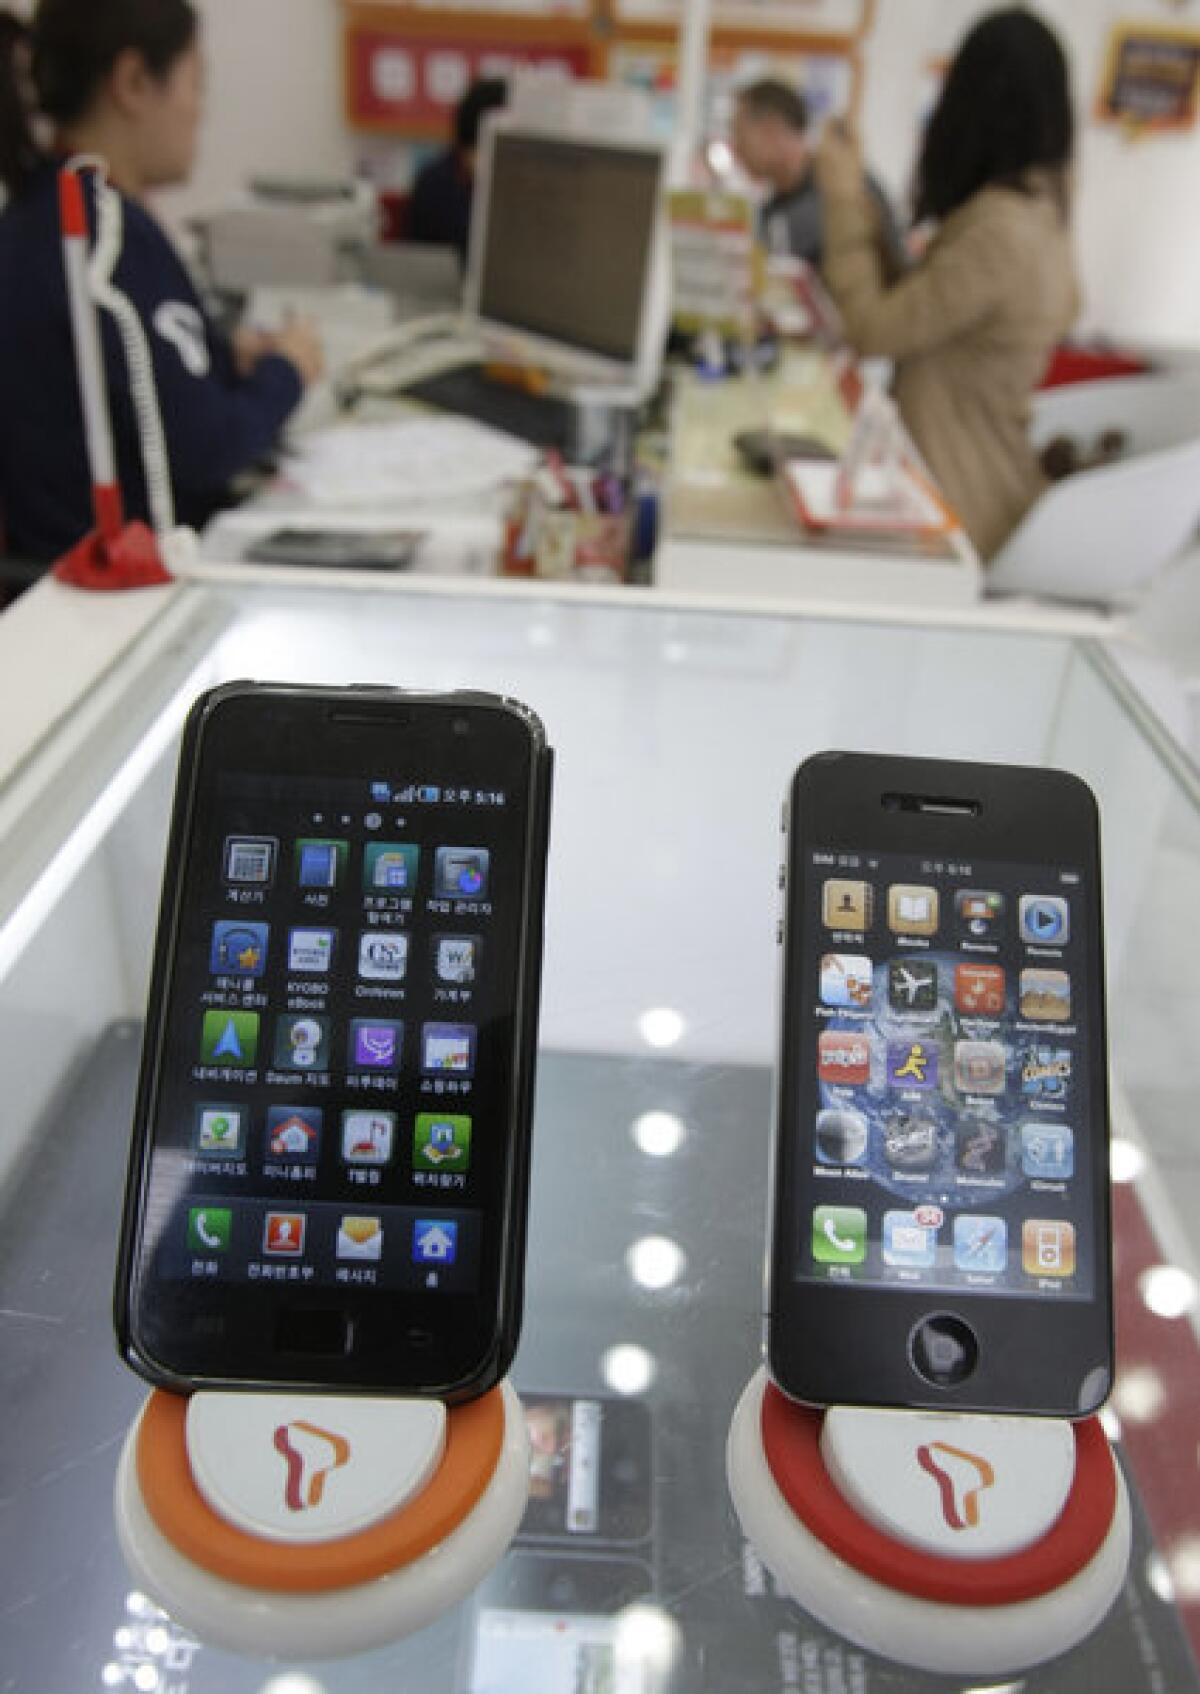 A federal judge denied Apple's request to increase its $1-billion patent infringement judgment against Samsung. Above, a Samsung Galaxy S smartphone, left, and Apple's iPhone 4 at a store in Seoul in 2011.